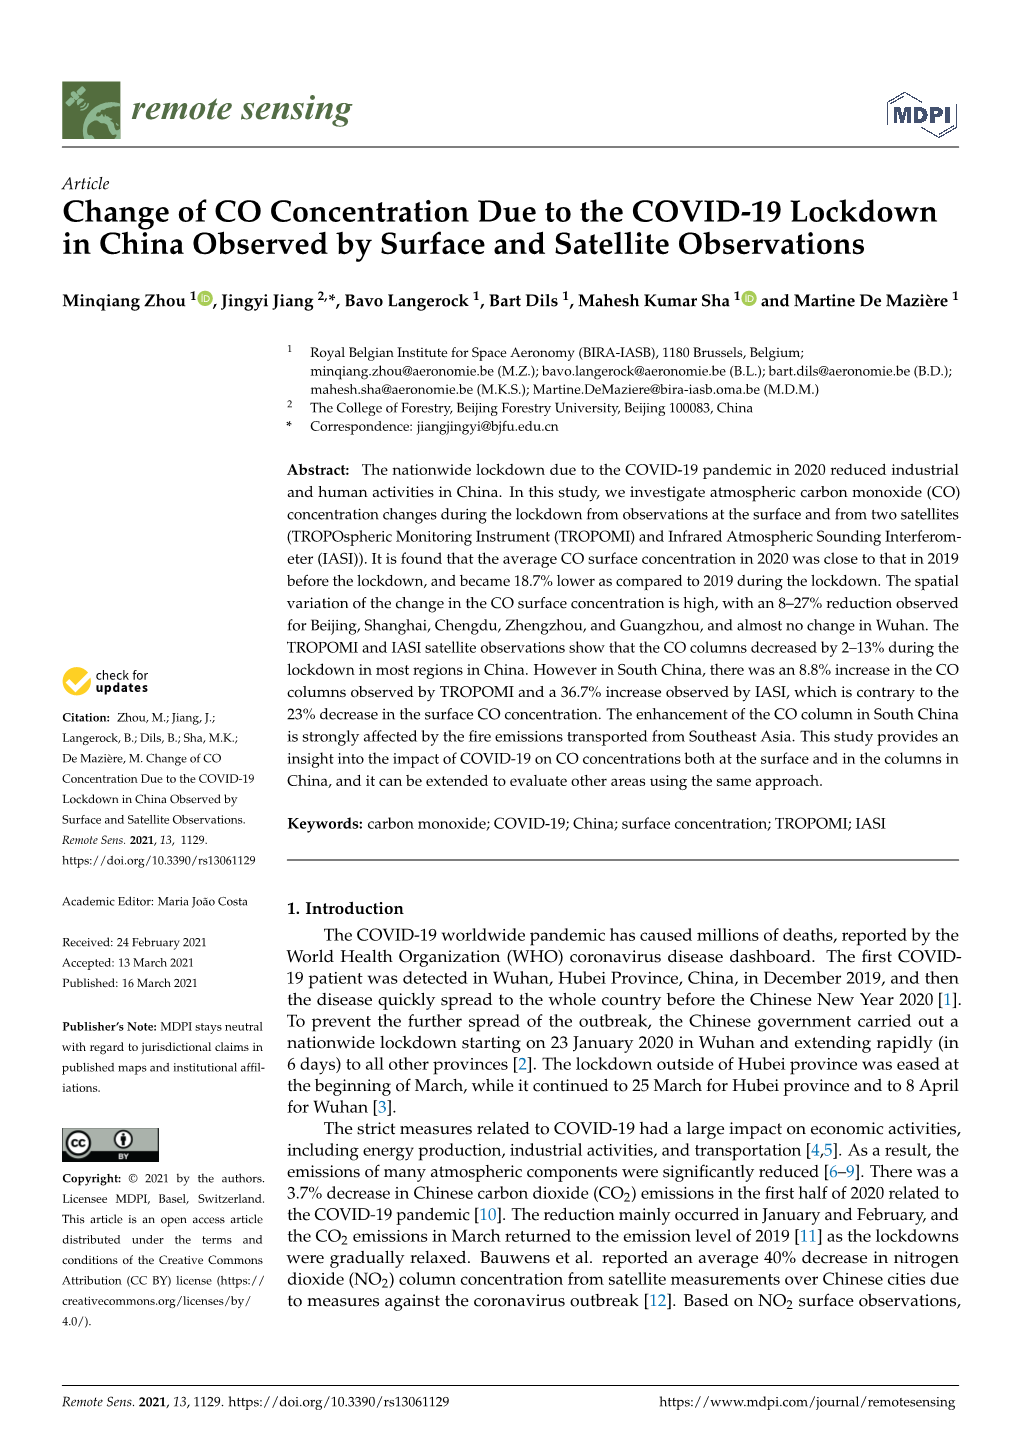 Change of CO Concentration Due to the COVID-19 Lockdown in China Observed by Surface and Satellite Observations